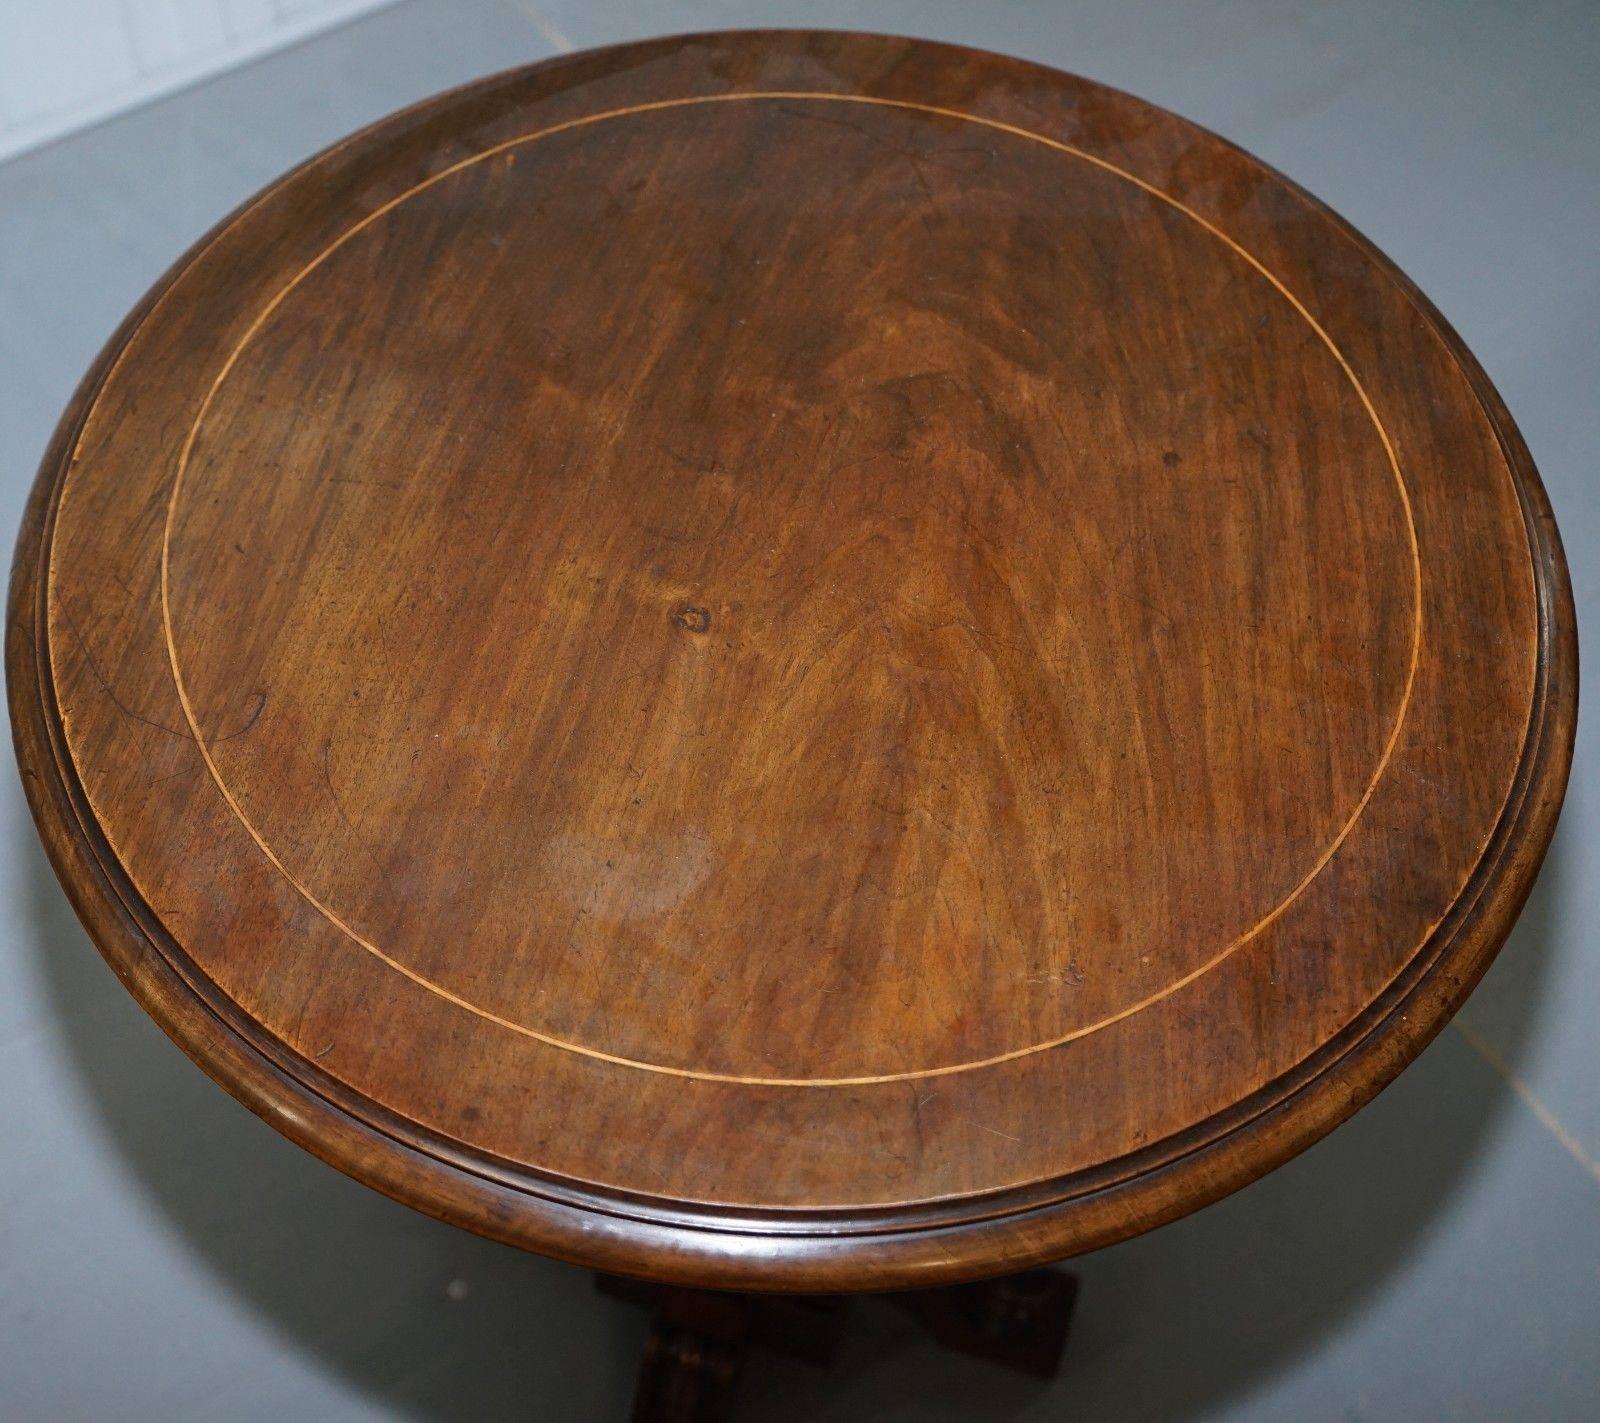 We are delighted to offer for sale this absolutely stunning walnut side table with quad pillared base

A rare find, I have never seen a four-pillar base formation like this before, it looks wonderfully symmetrical and absolutely stunning from